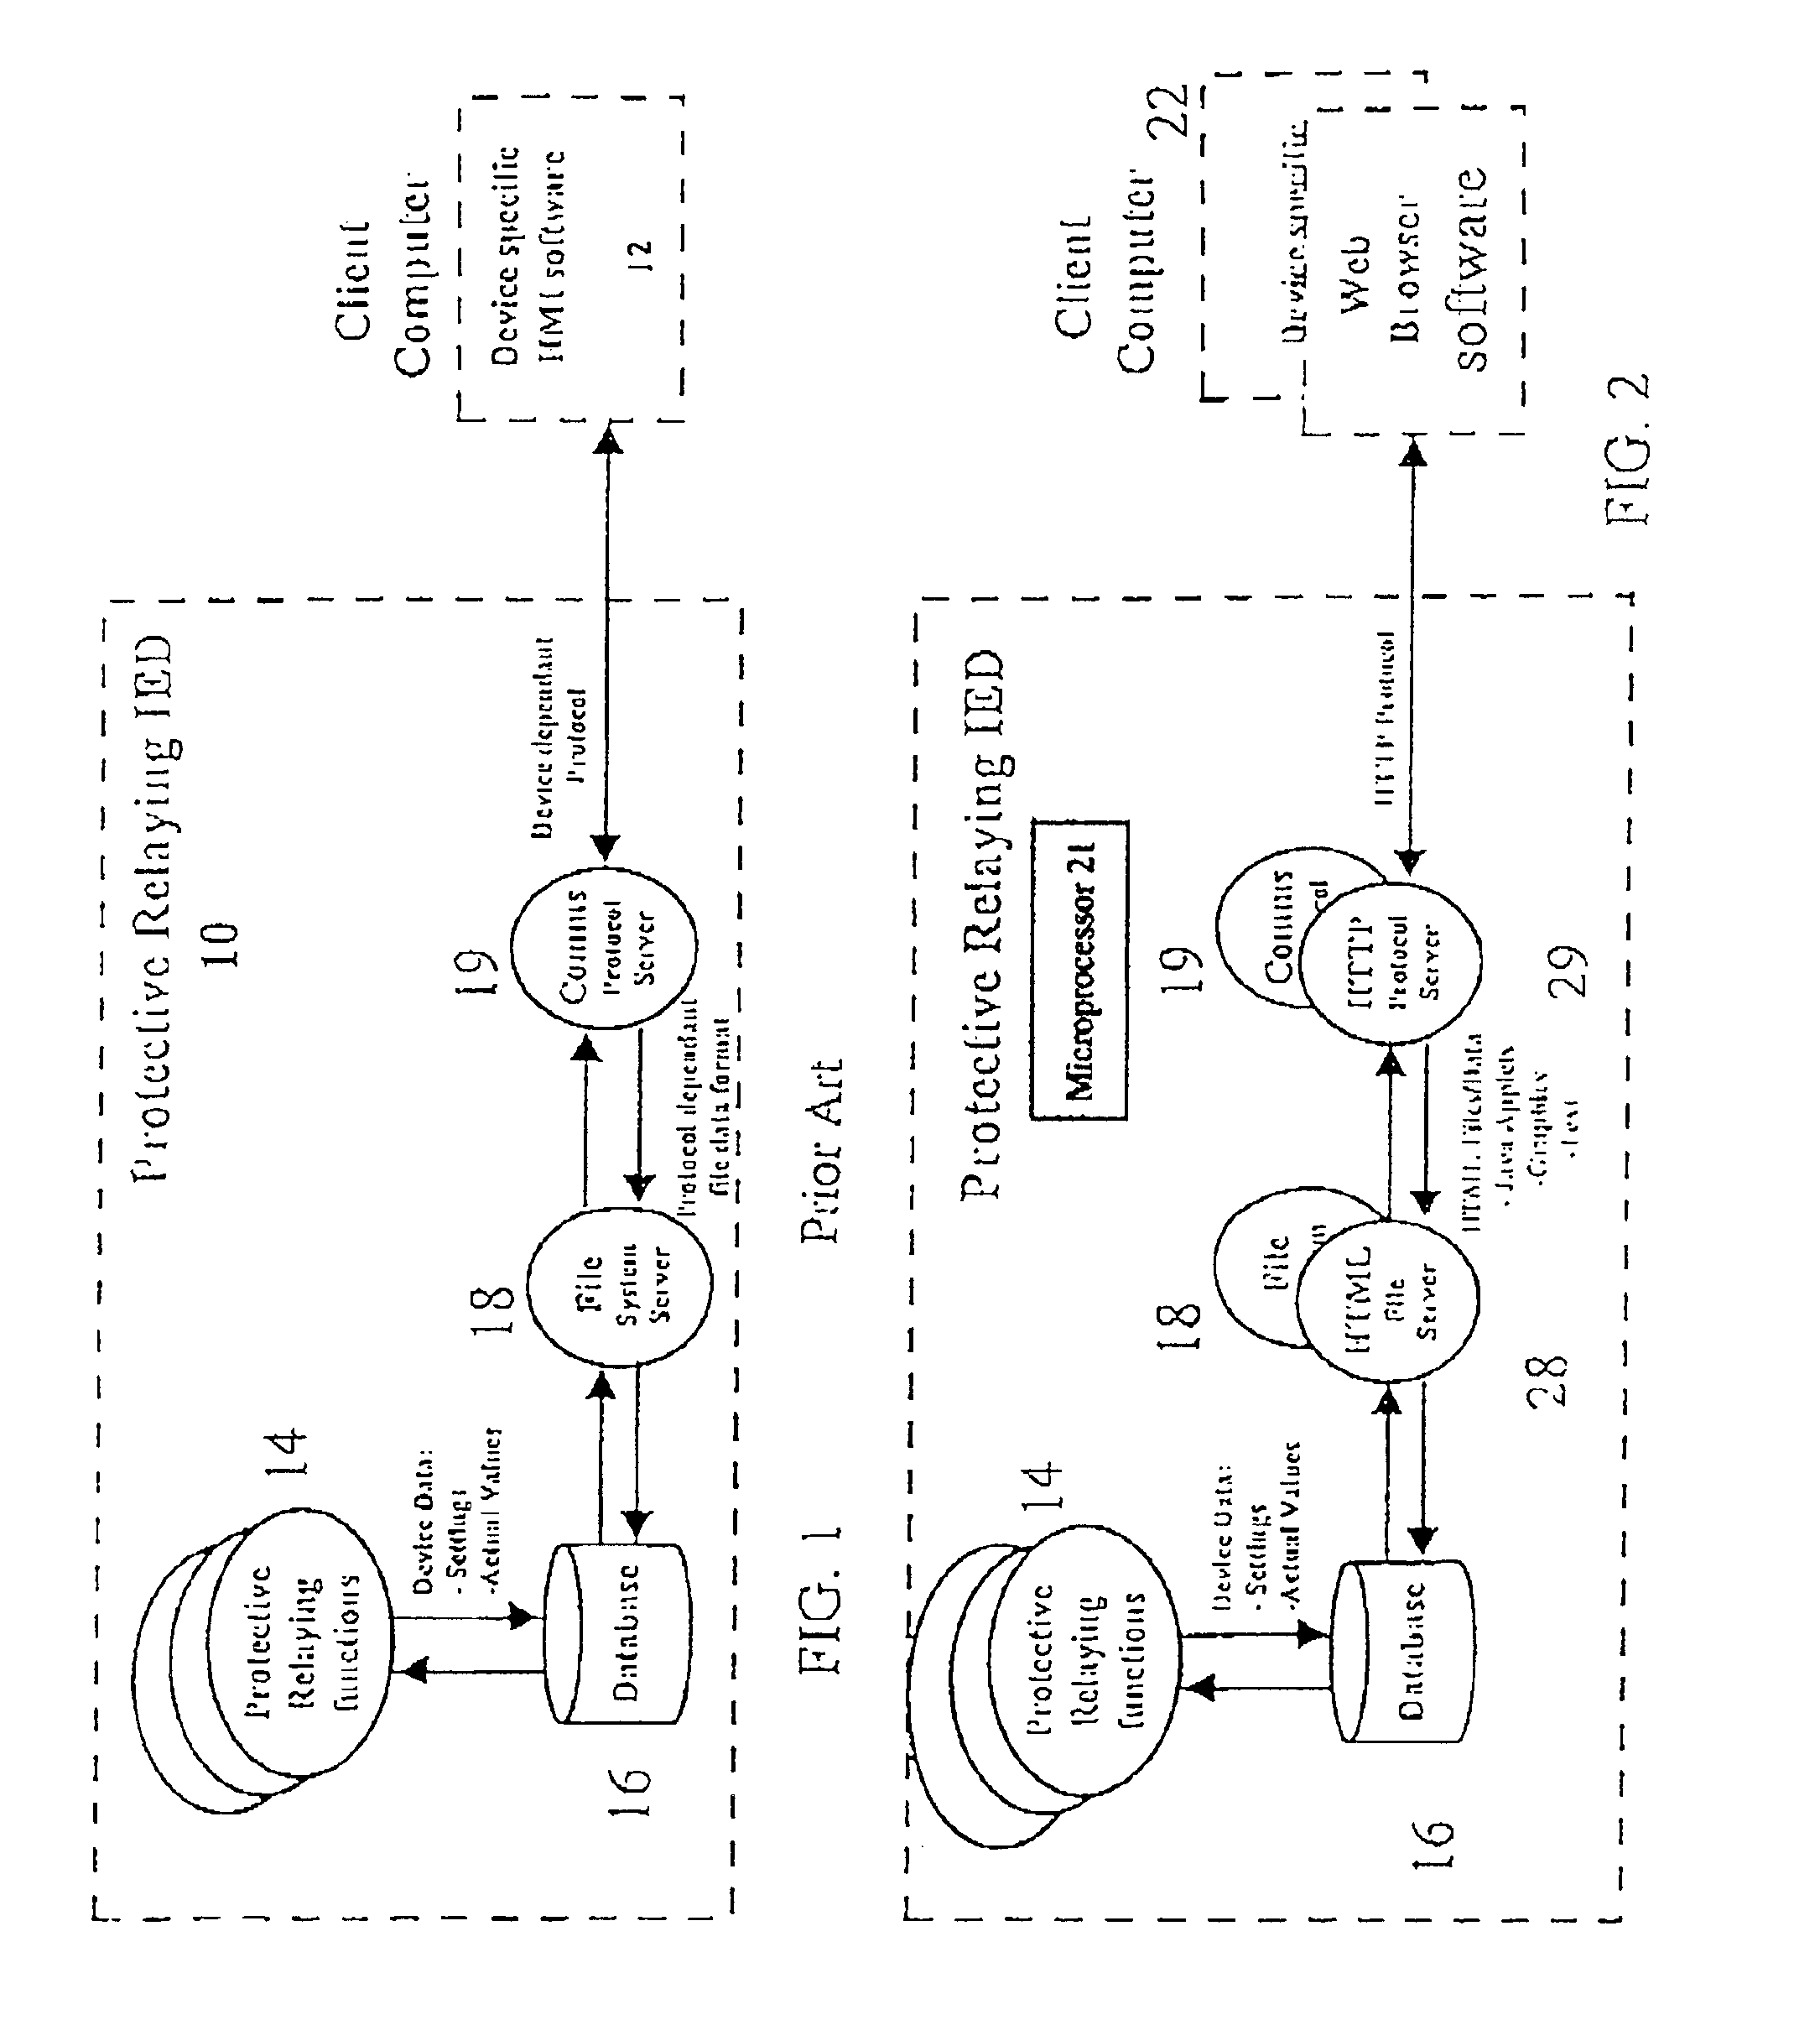 Protective relay with embedded web server